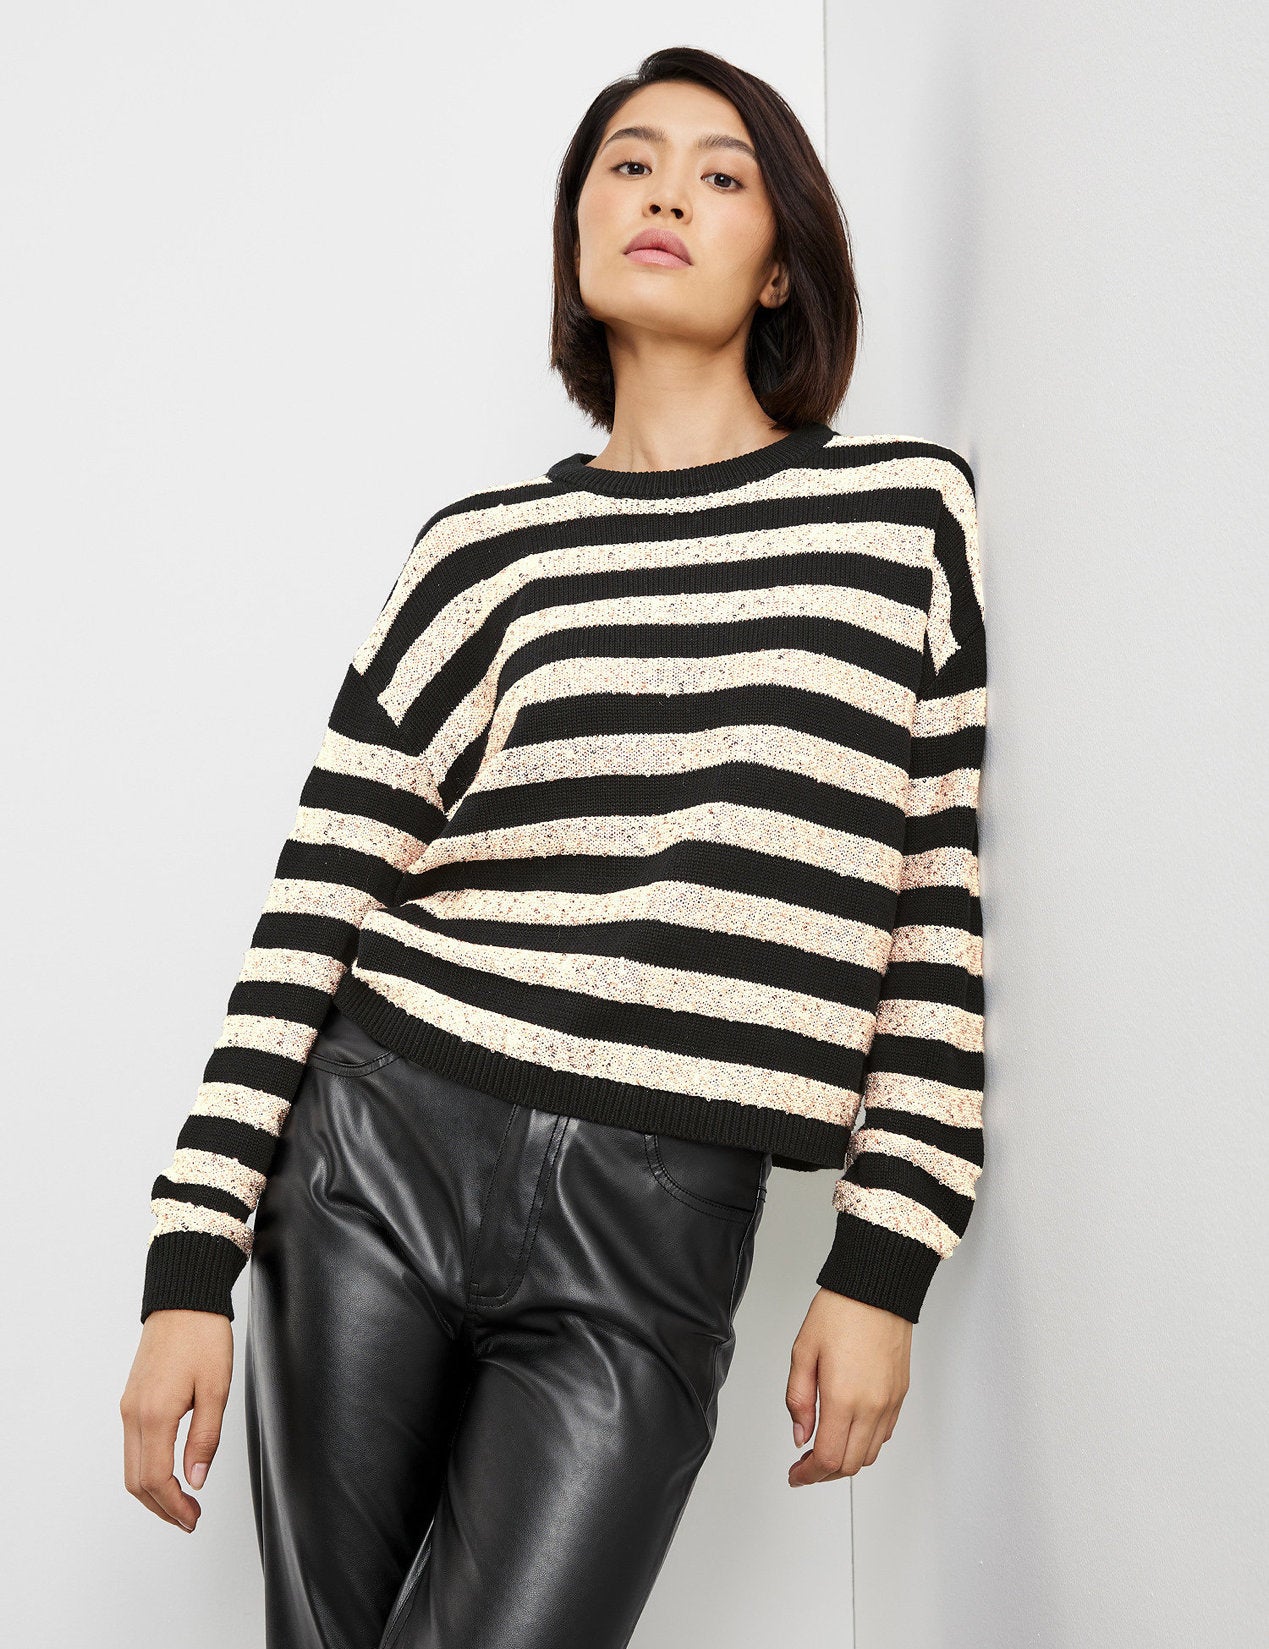 Striped Jumper With Sequin Embellishment_472414-15314_1103_01